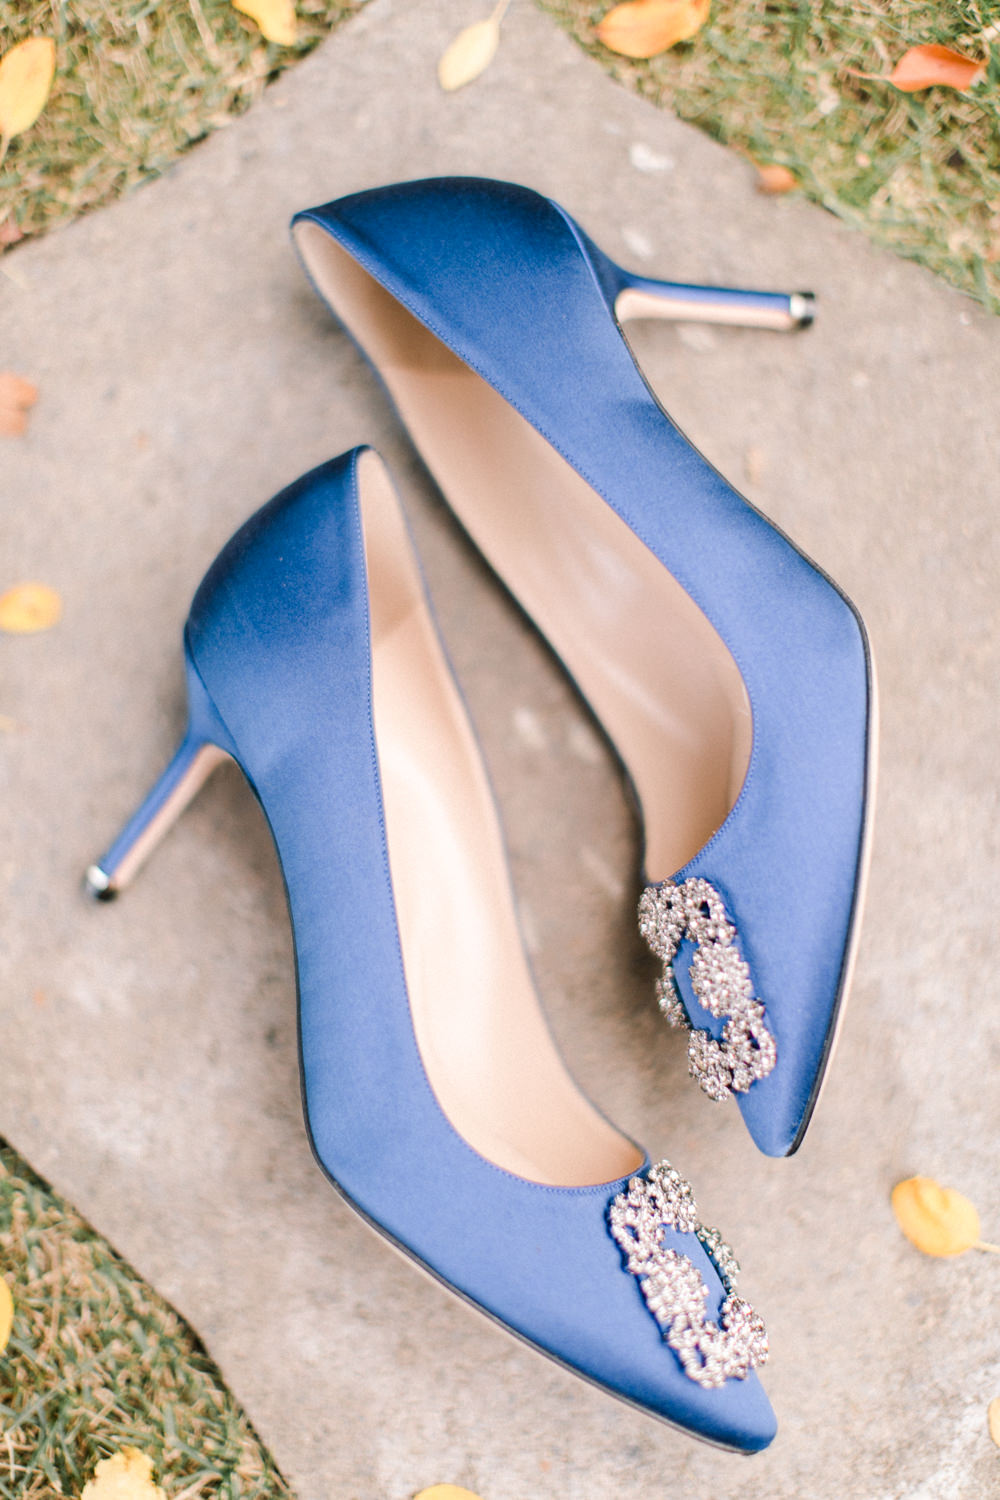 detail shot of a pair of blue Manolo Blahnik wedding shoes at the lake house in Calgary